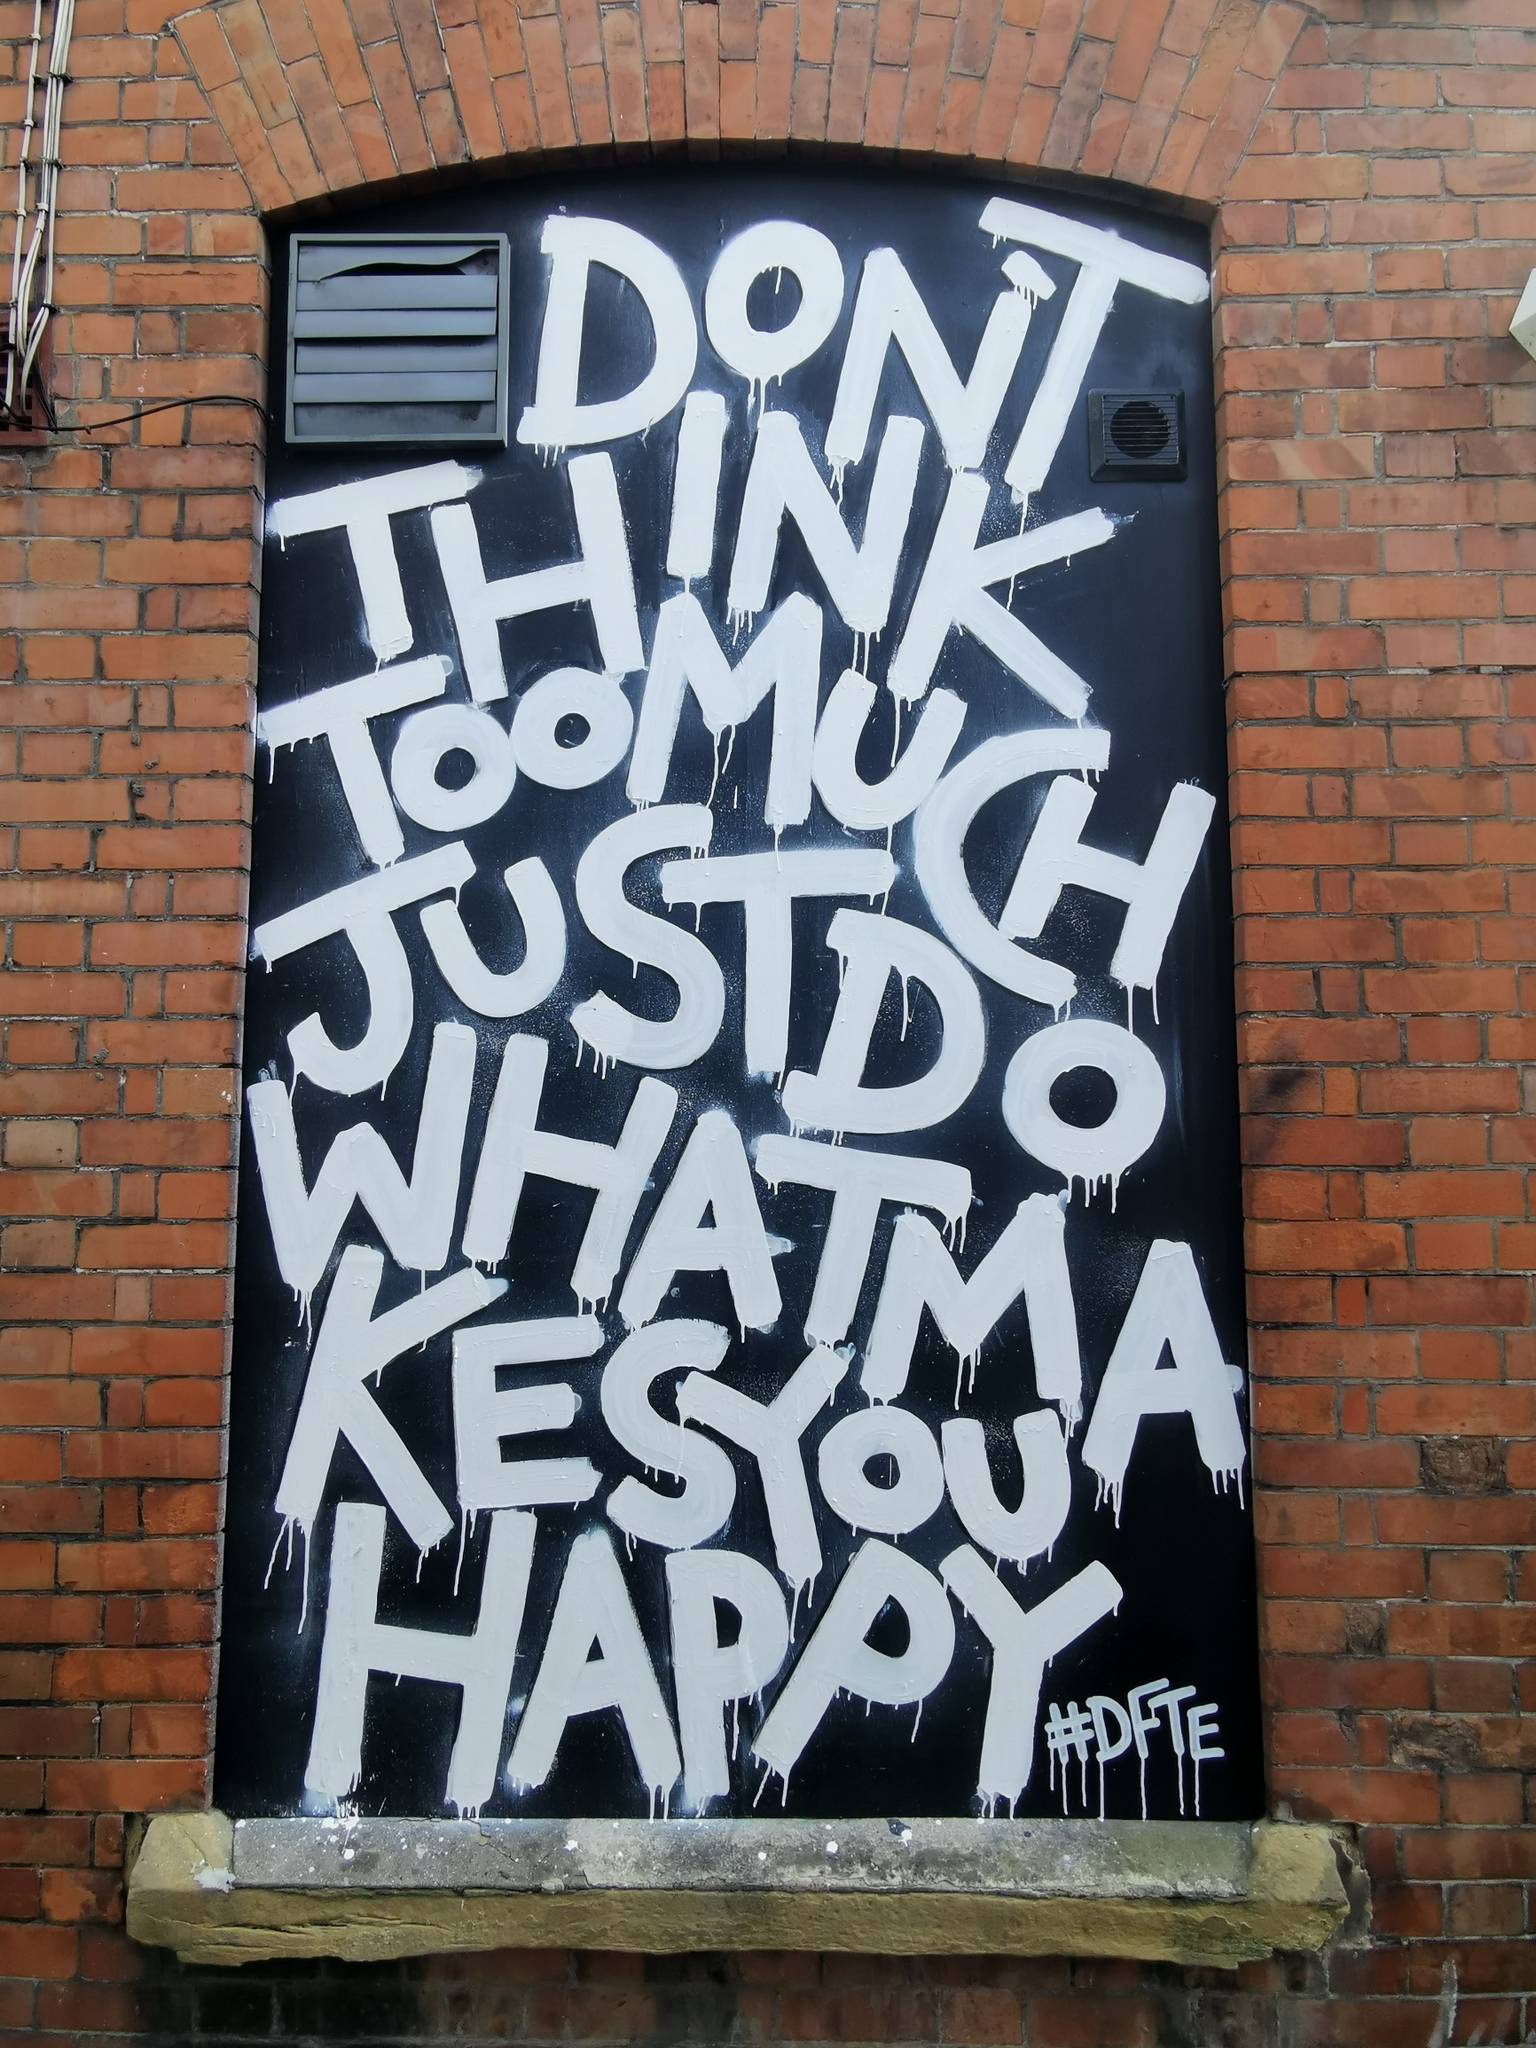 DFTE&mdash;Don't Think Too Much Just Do What Makes You Happy